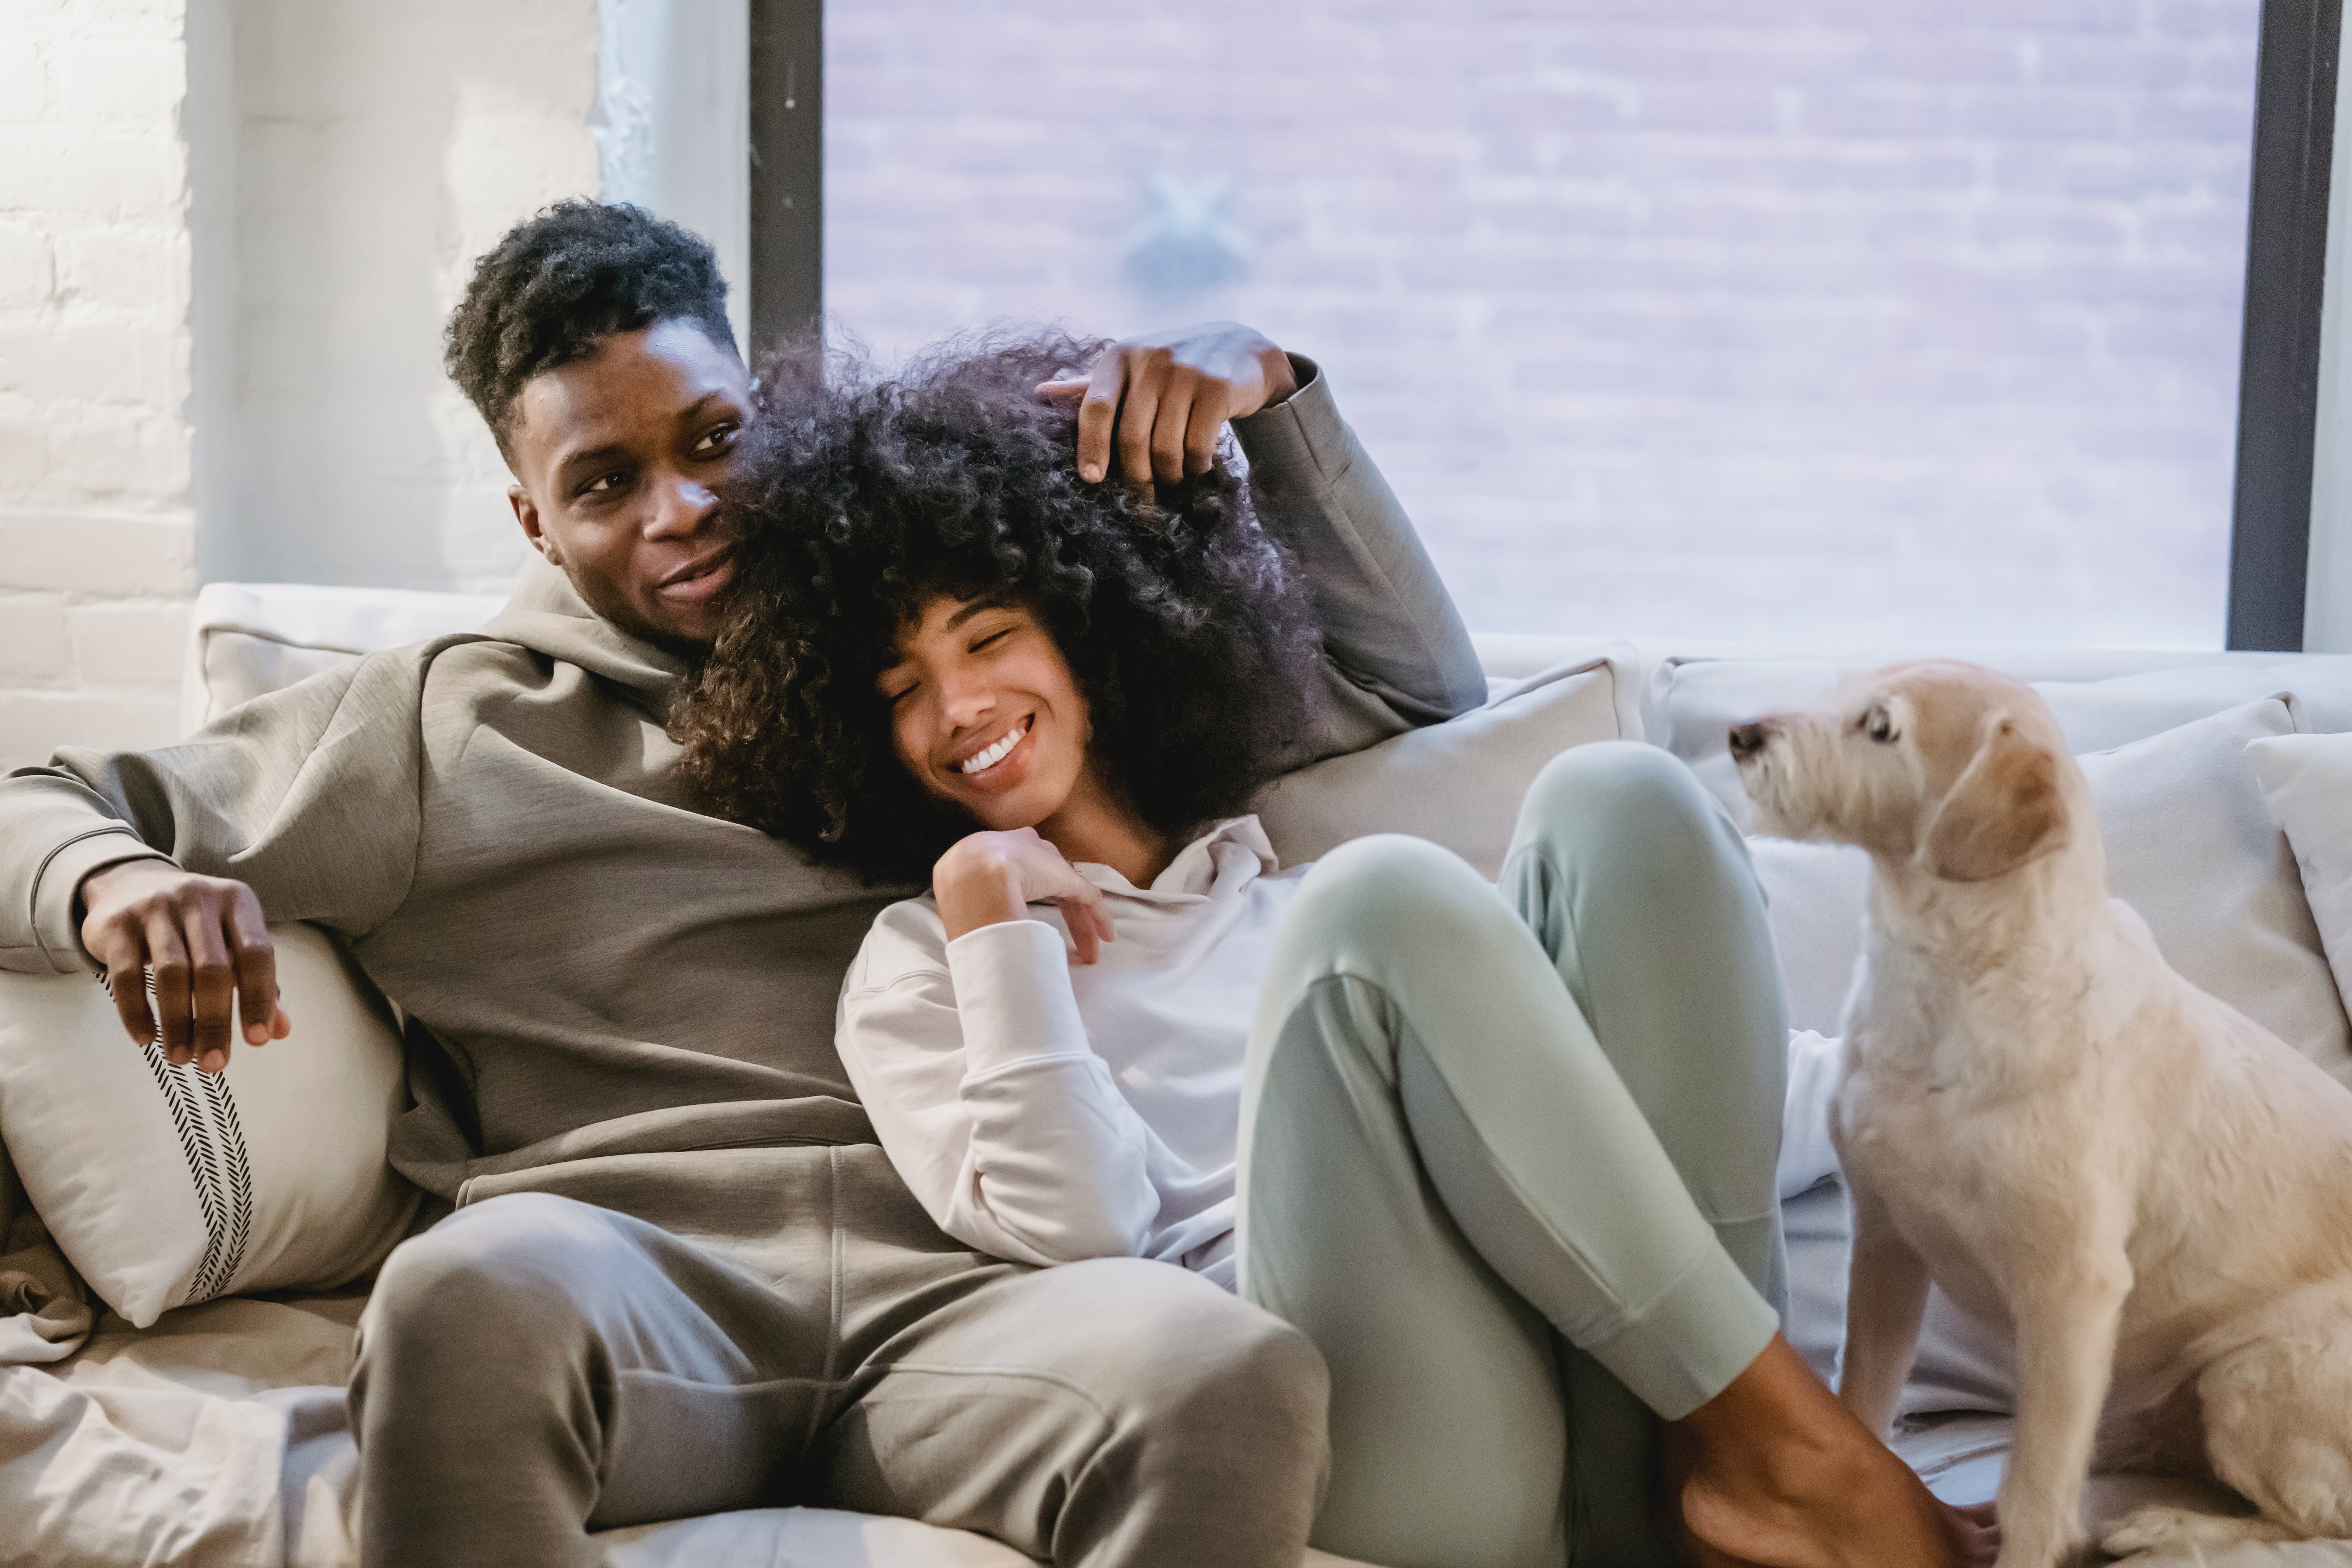 A couple on a couch. | Source: Pexels